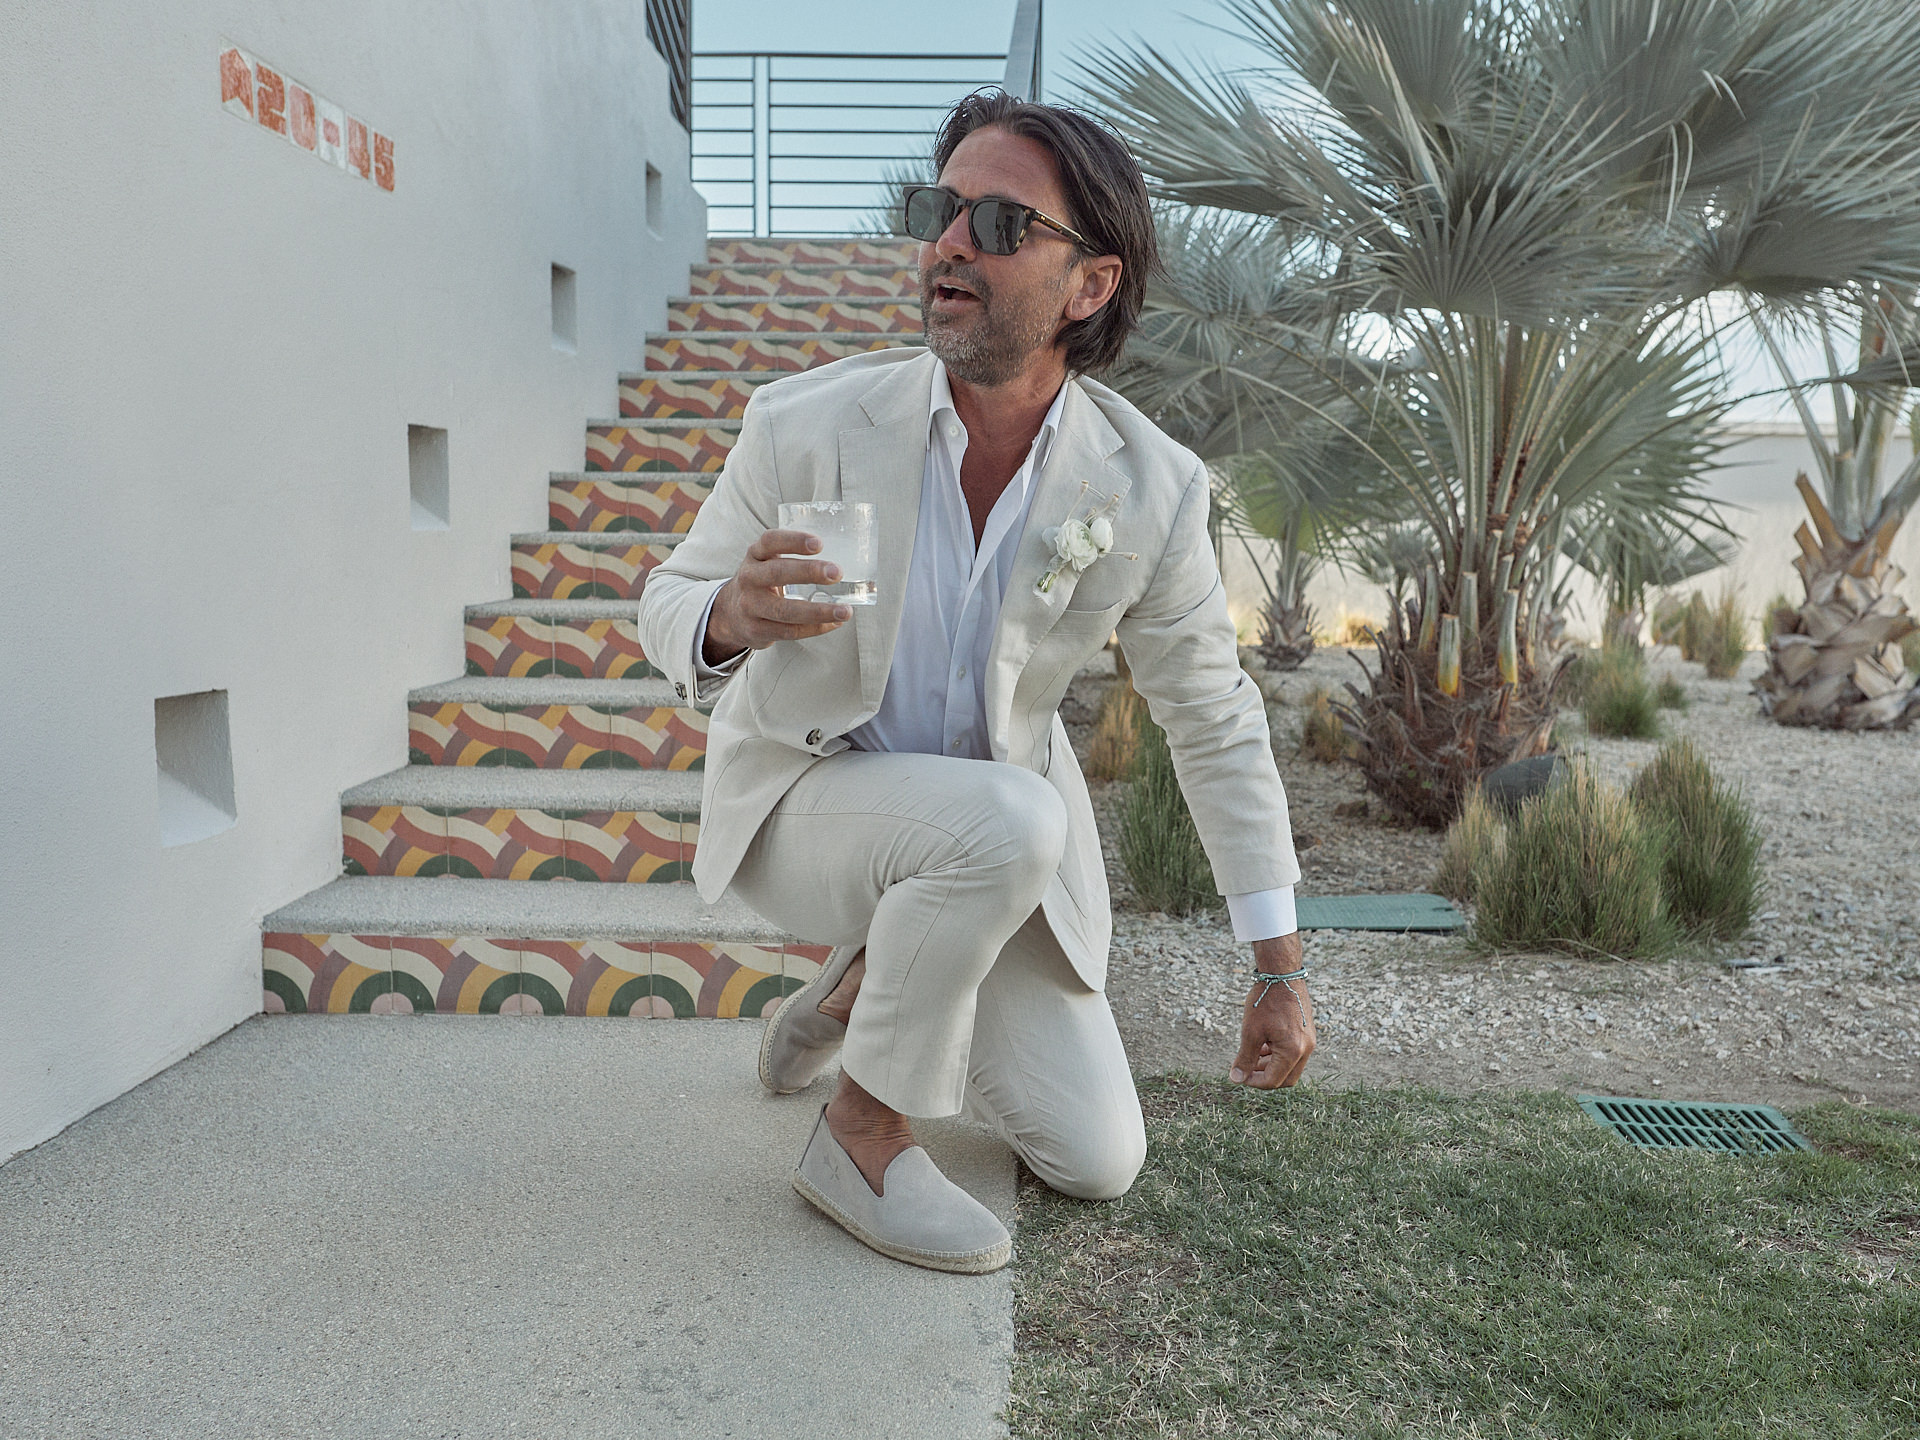 A Man In A White Suit Is Holding A Drink.